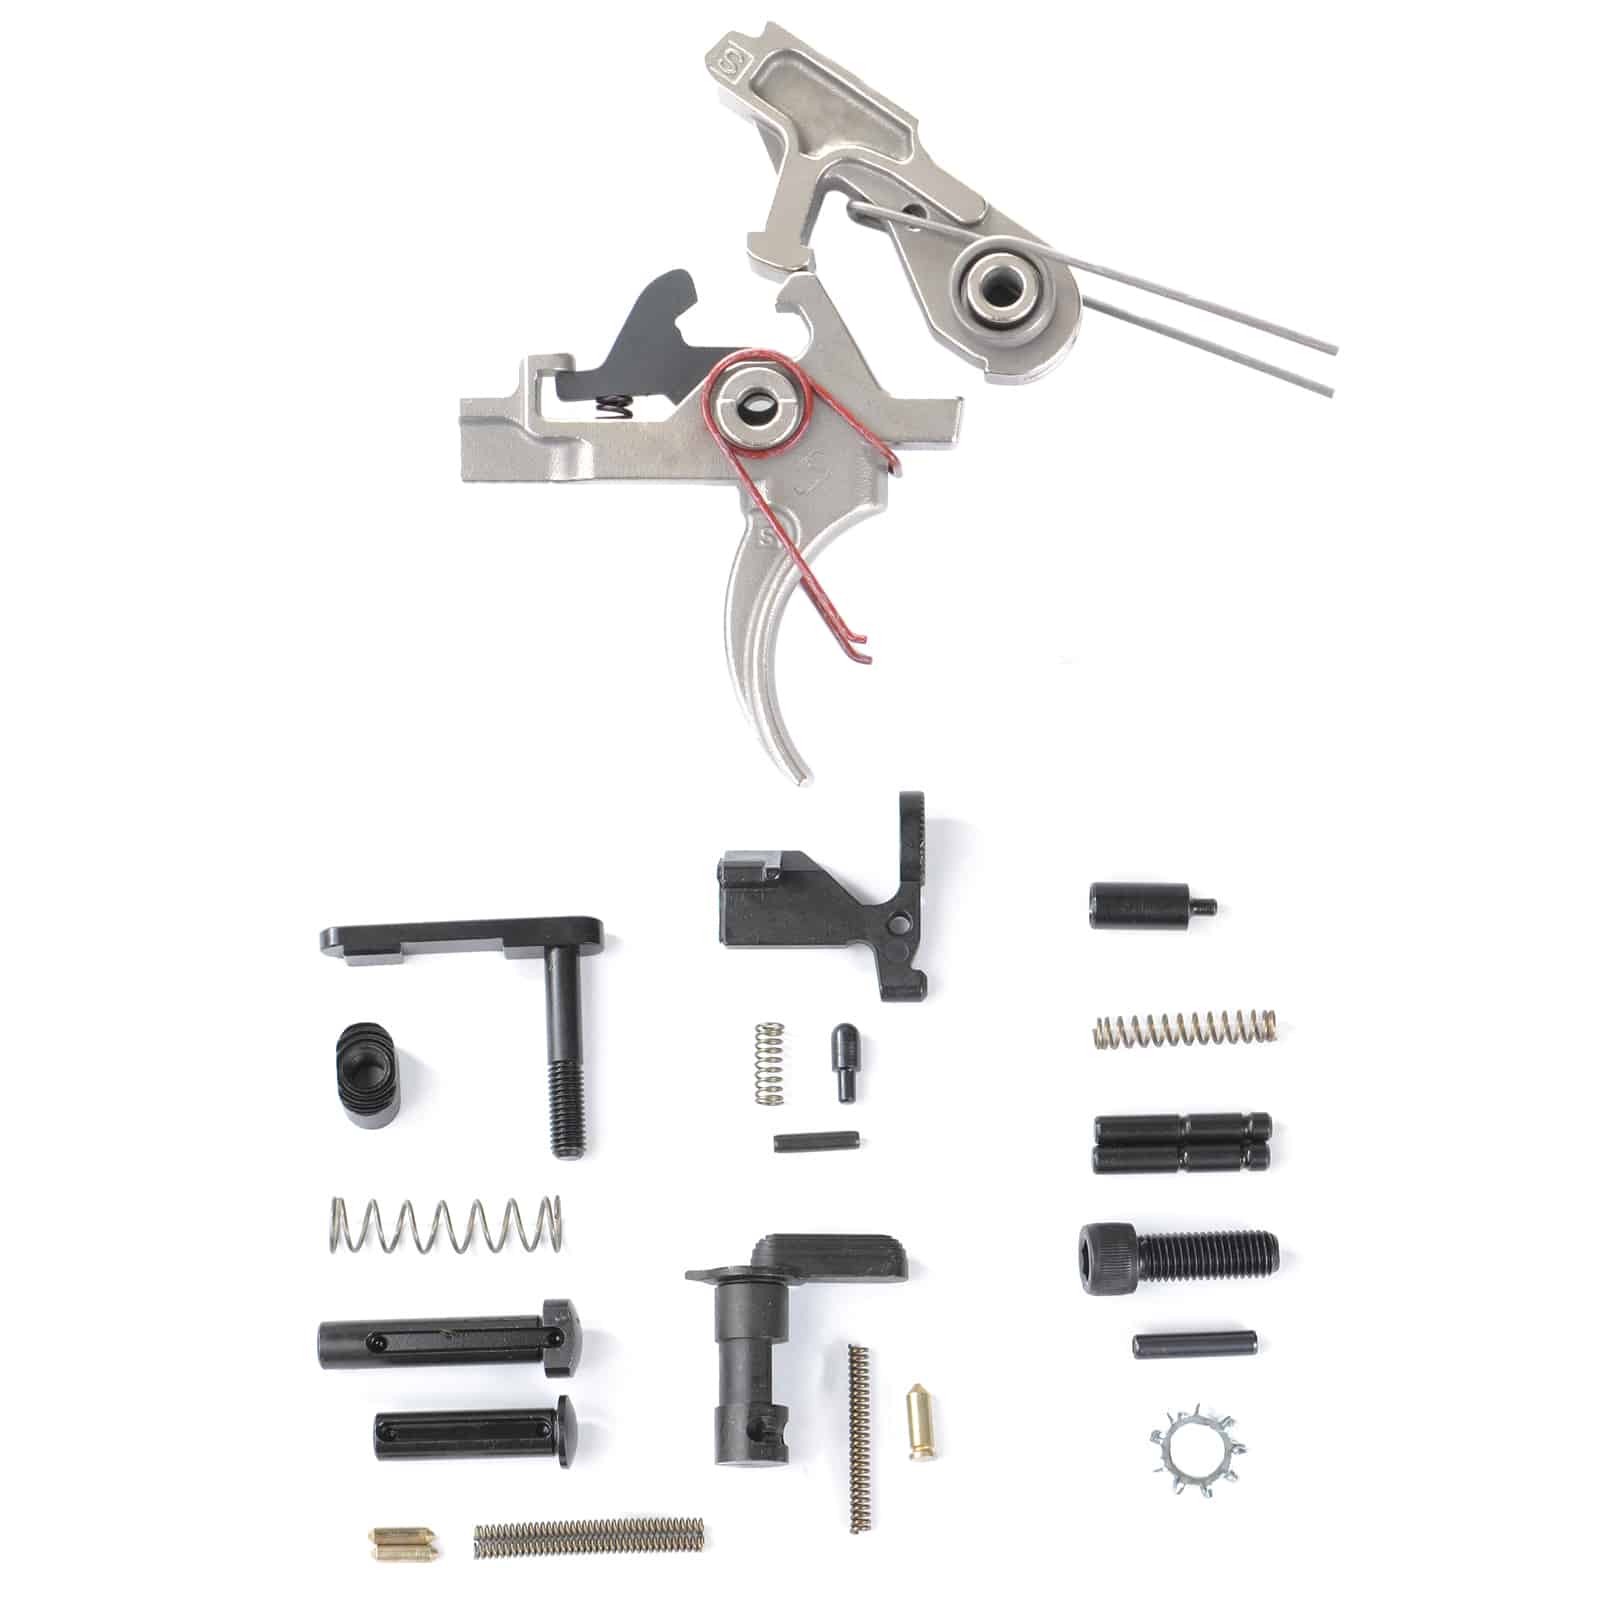 AT3™ 2-Stage AR 15 Lower Parts Kit with Nickel Boron Trigger – No Grip or Trigger Guard